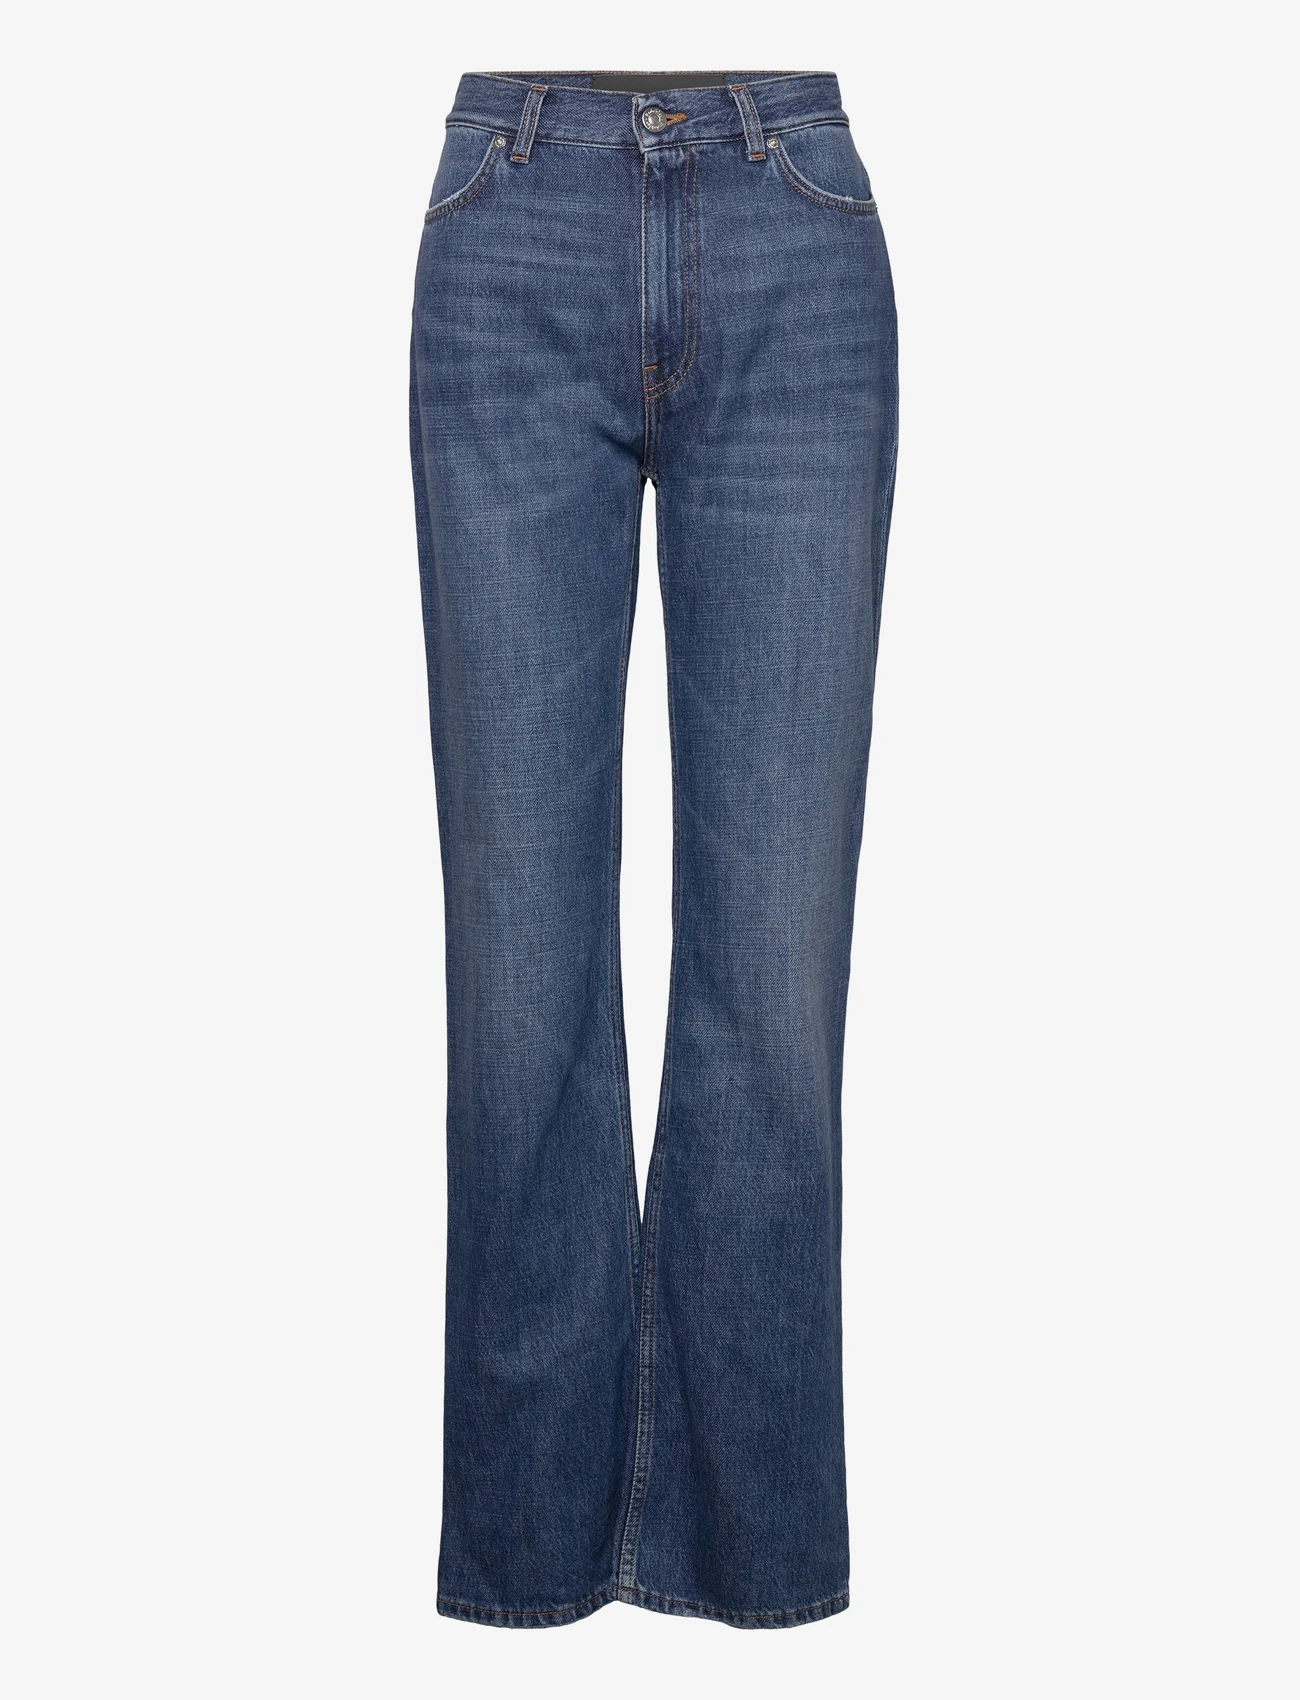 RODEBJER - Rodebjer Extended Flare - flared jeans - indigo - 0